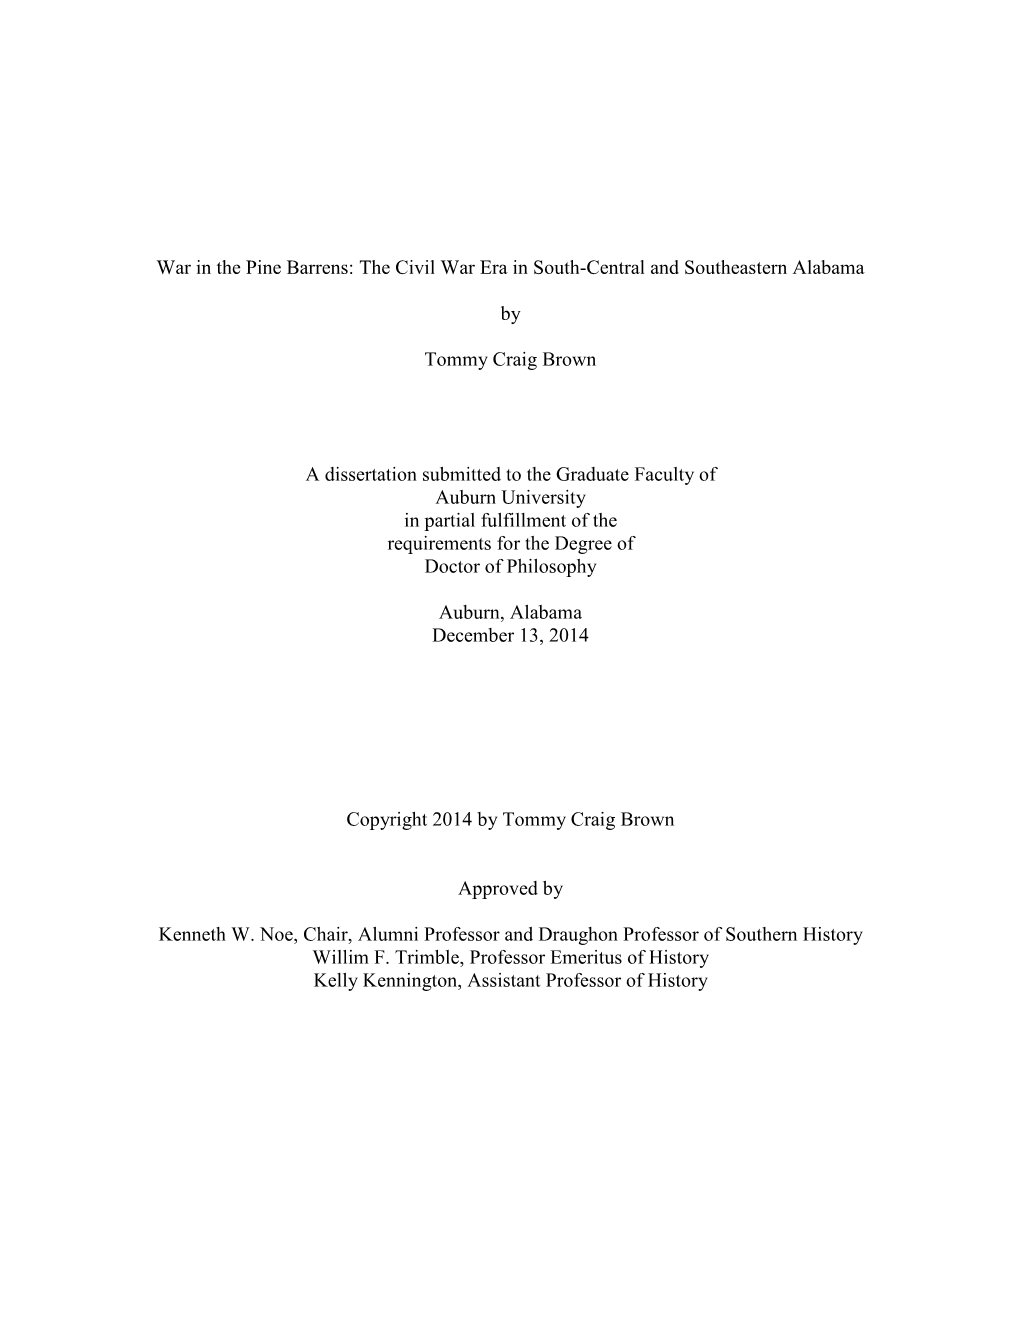 War in the Pine Barrens: the Civil War Era in South-Central and Southeastern Alabama by Tommy Craig Brown a Dissertation Submitt